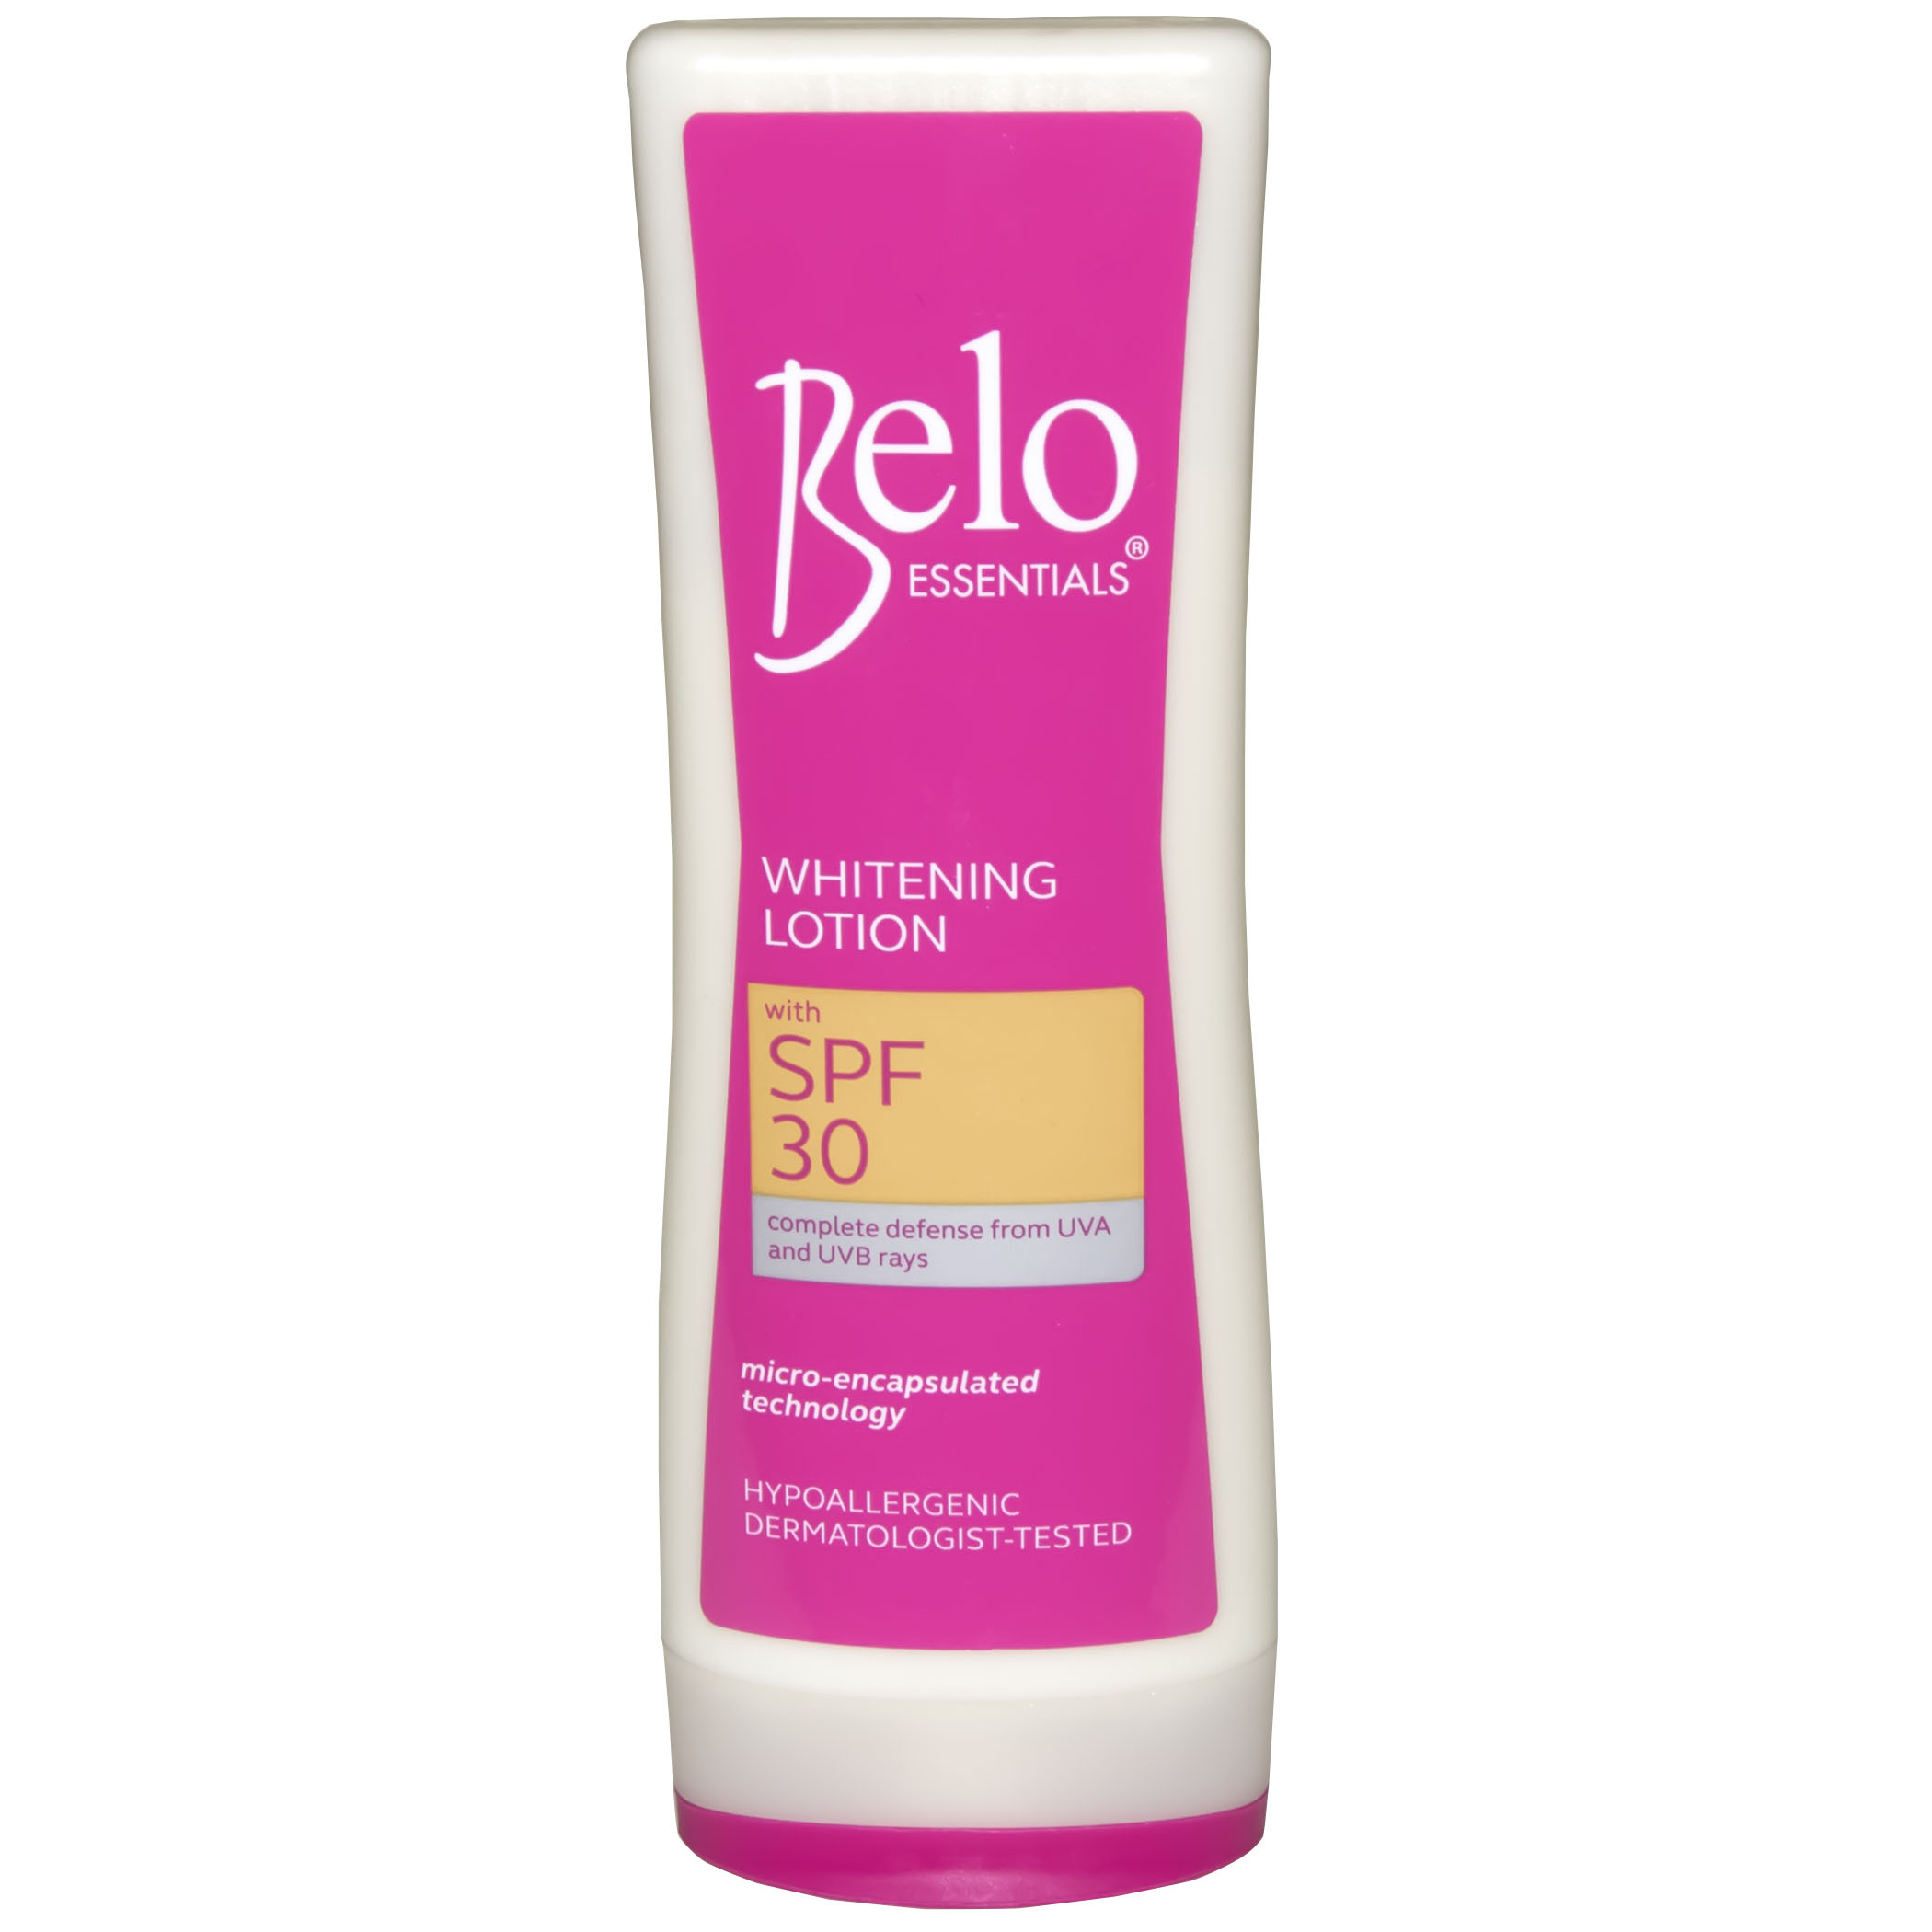 Buy BELO ESSENTIALS WHITENING LOTION WITH SPF 30 100ML (Pack of 1) Online - Get 38% Off